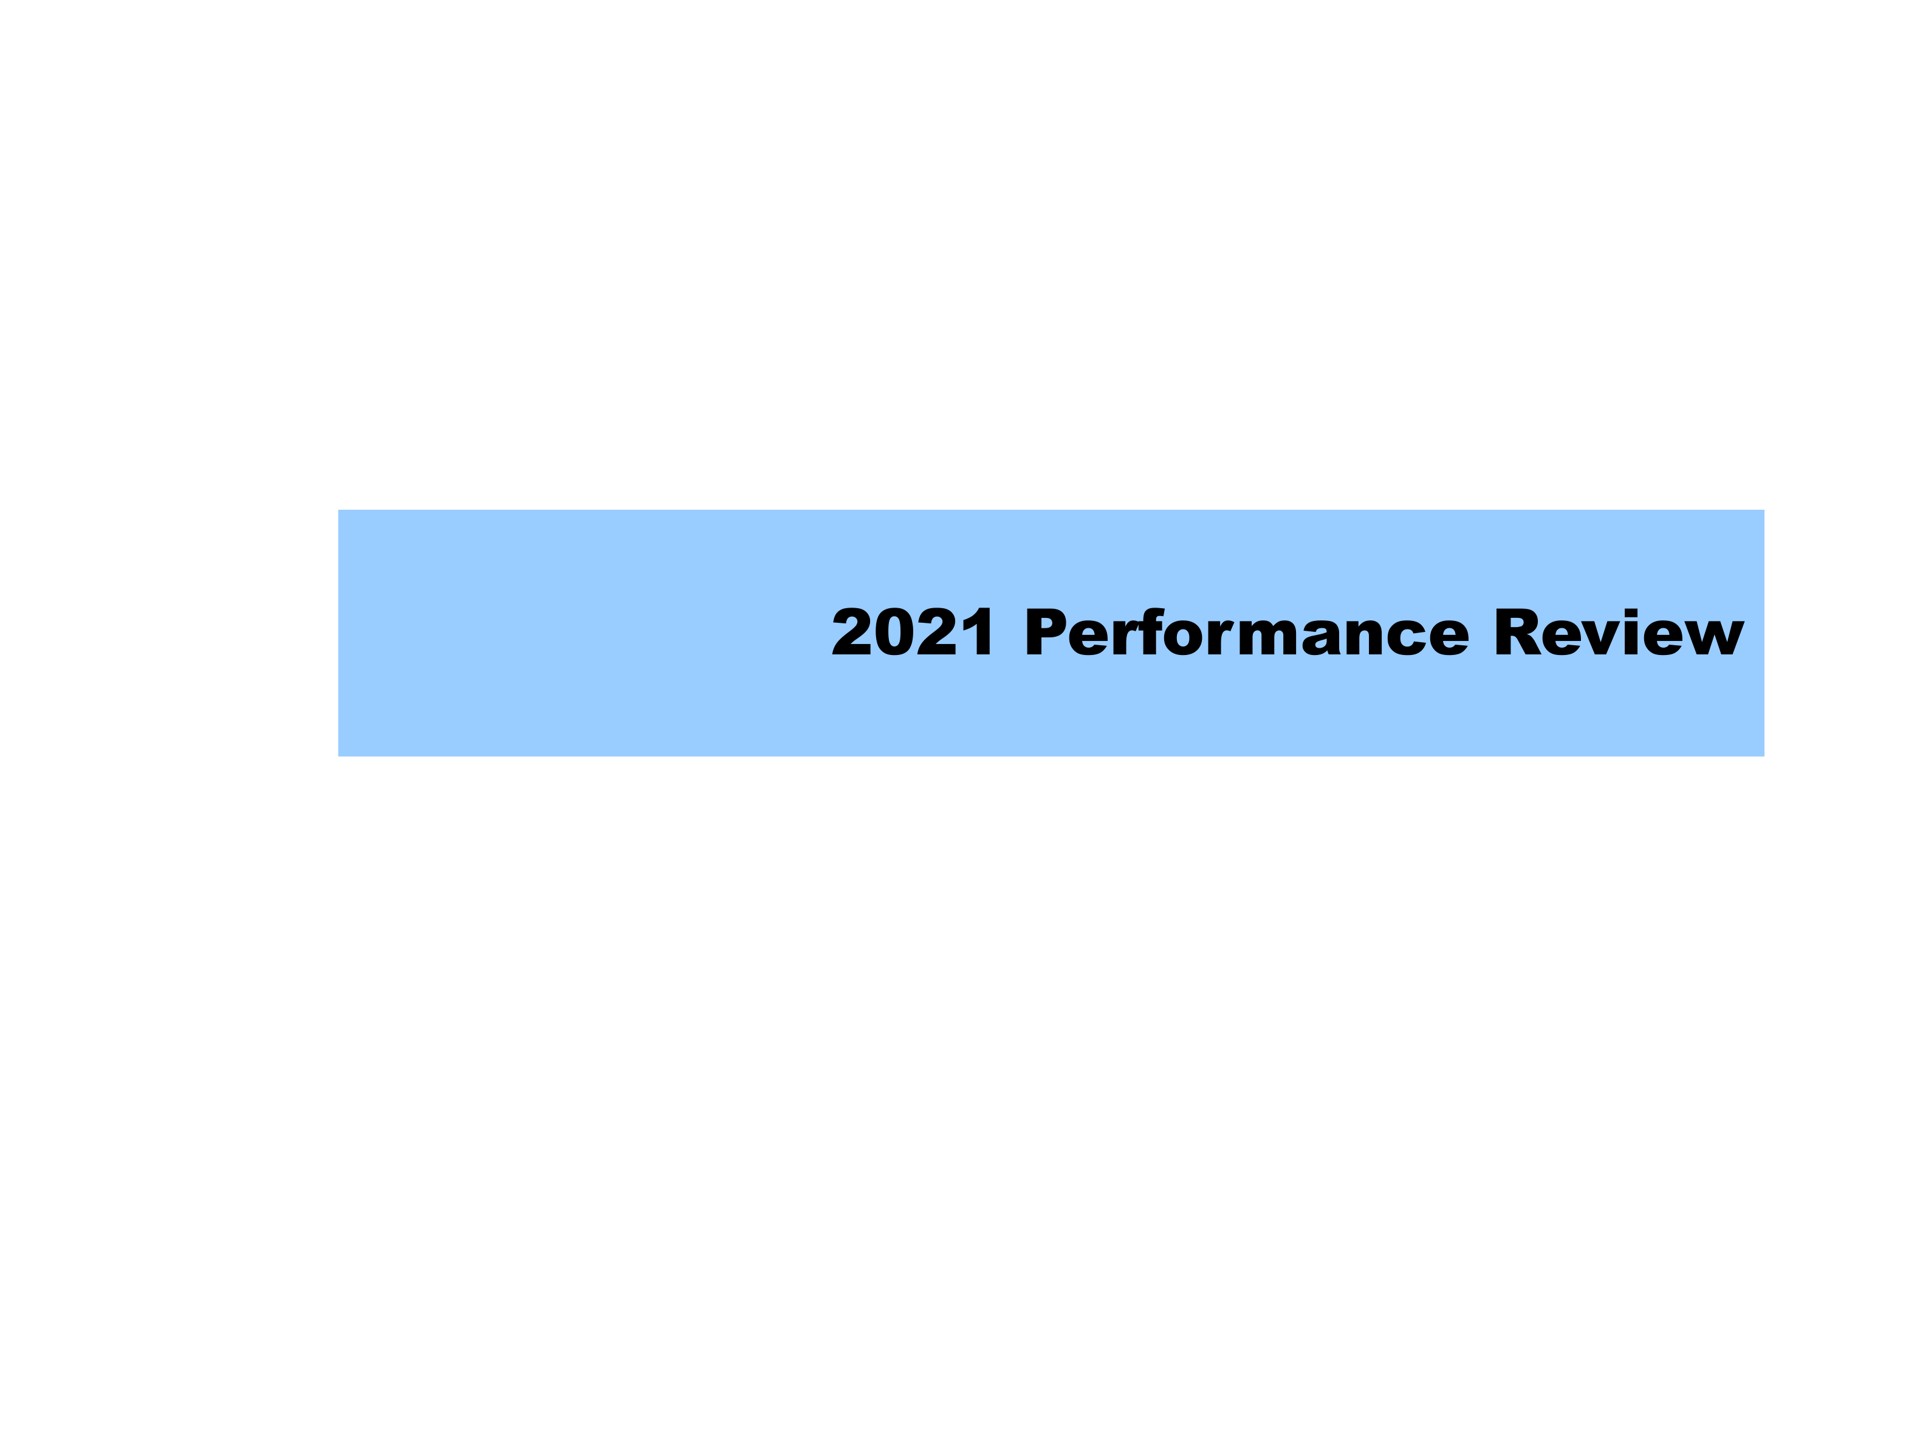 performance review | Pershing Square